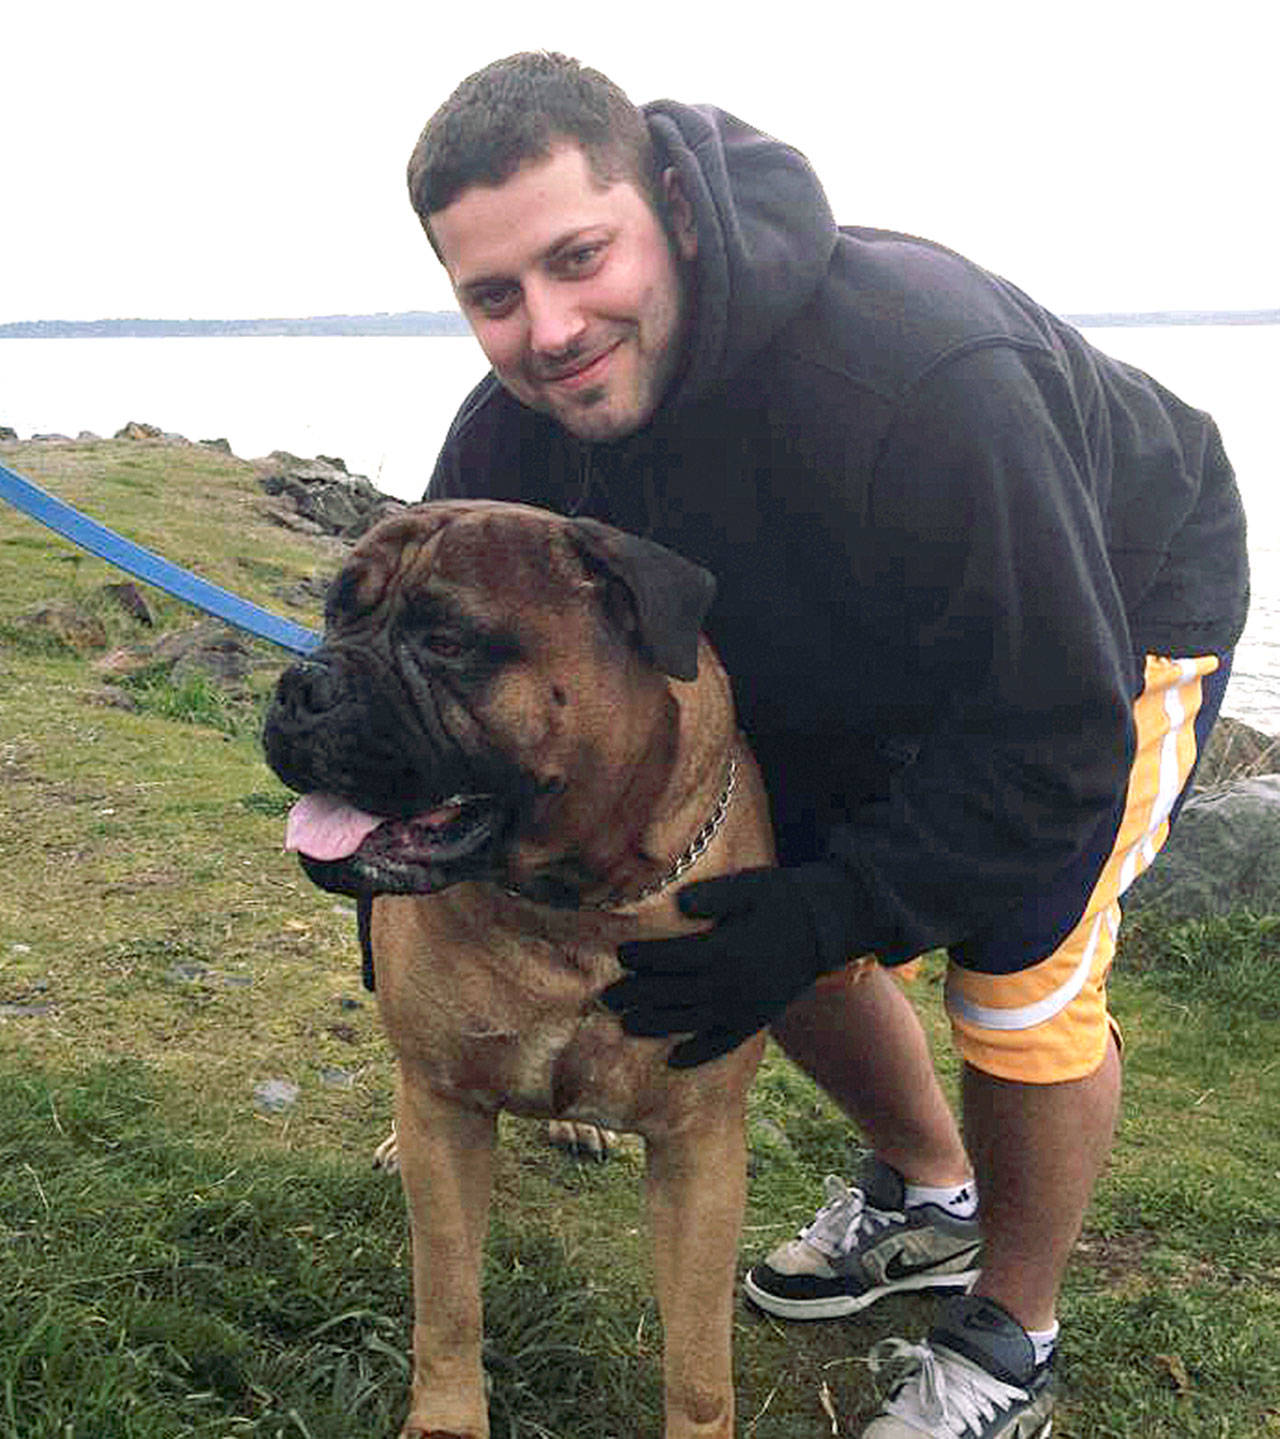 Alex Dold met a dog named Hoss while walking near Edmonds Marina. Every time he returned, he would look for Hoss. The dog, who lived with his owner on a boat, would come running to greet Alex.